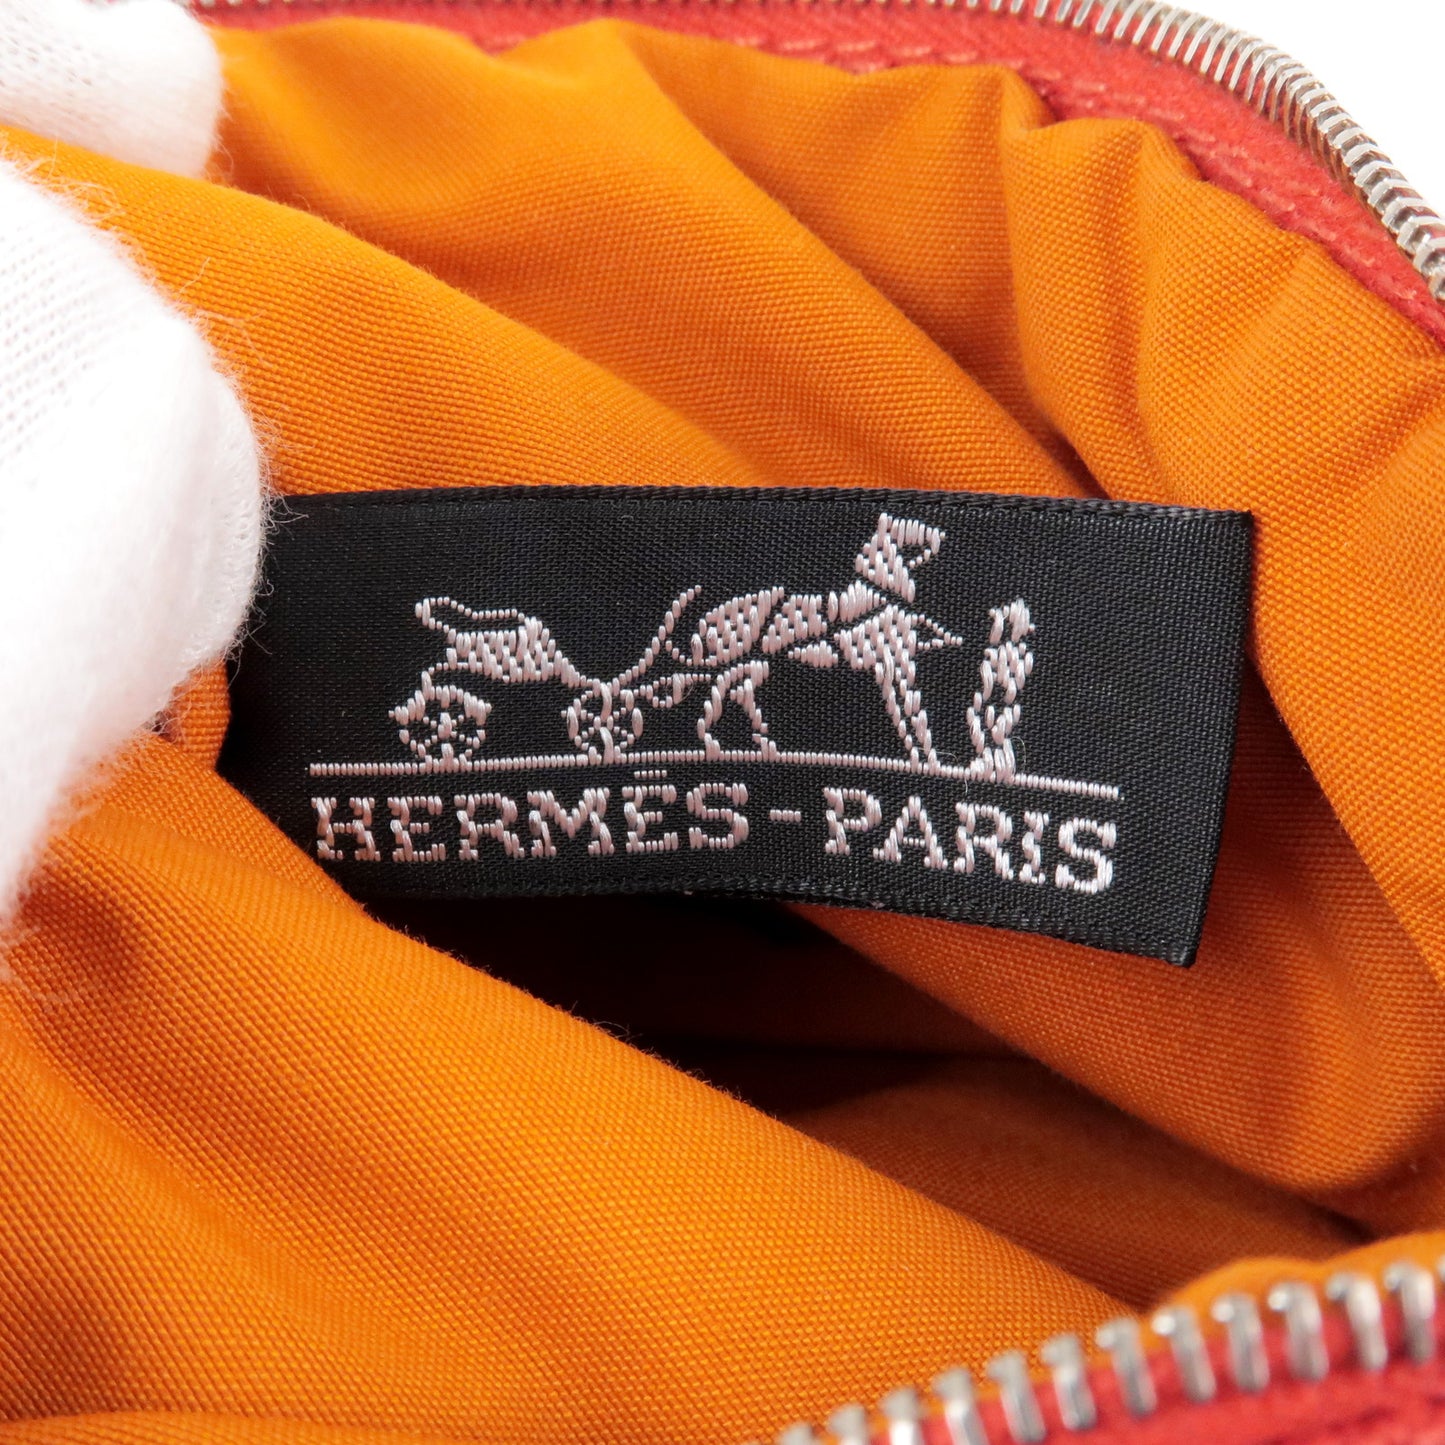 HERMES Bolide Pouch Canvas Leather Mini Cosmetics Bag Red Orange F/S